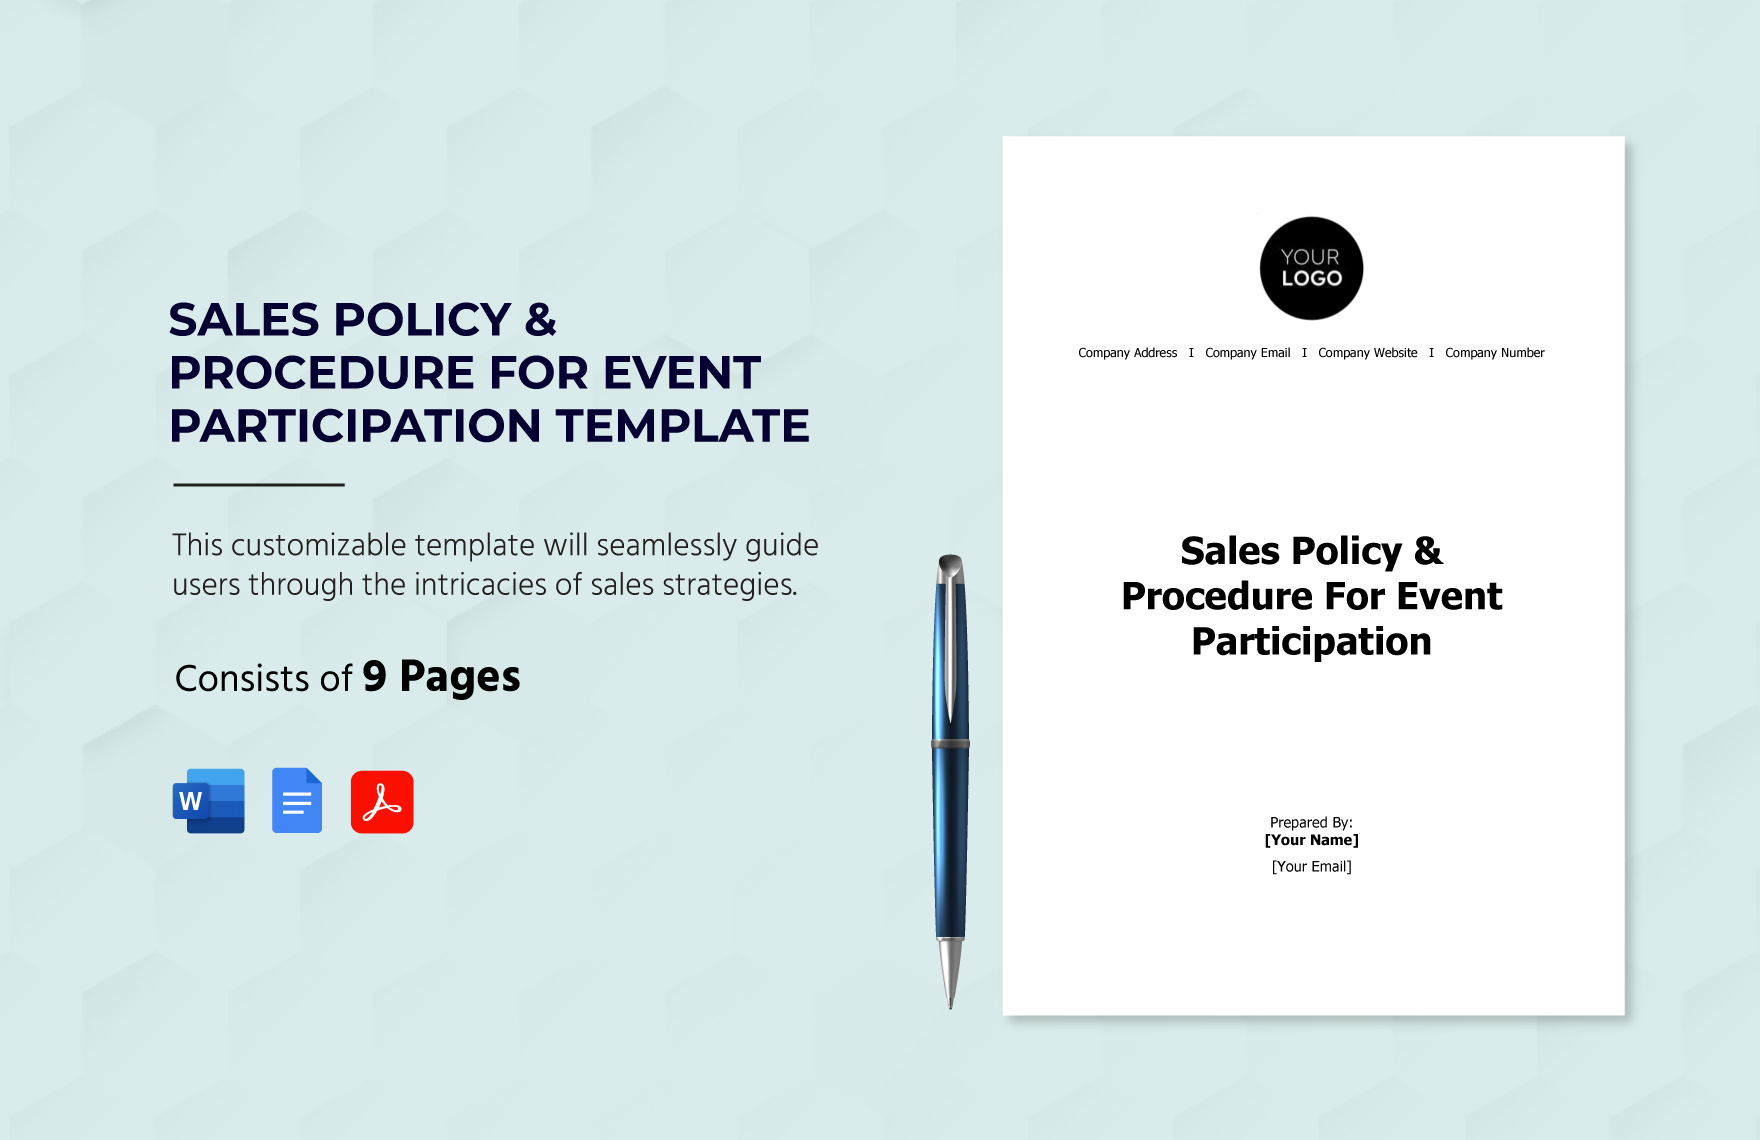 Sales Policy & Procedure for Event Participation Template